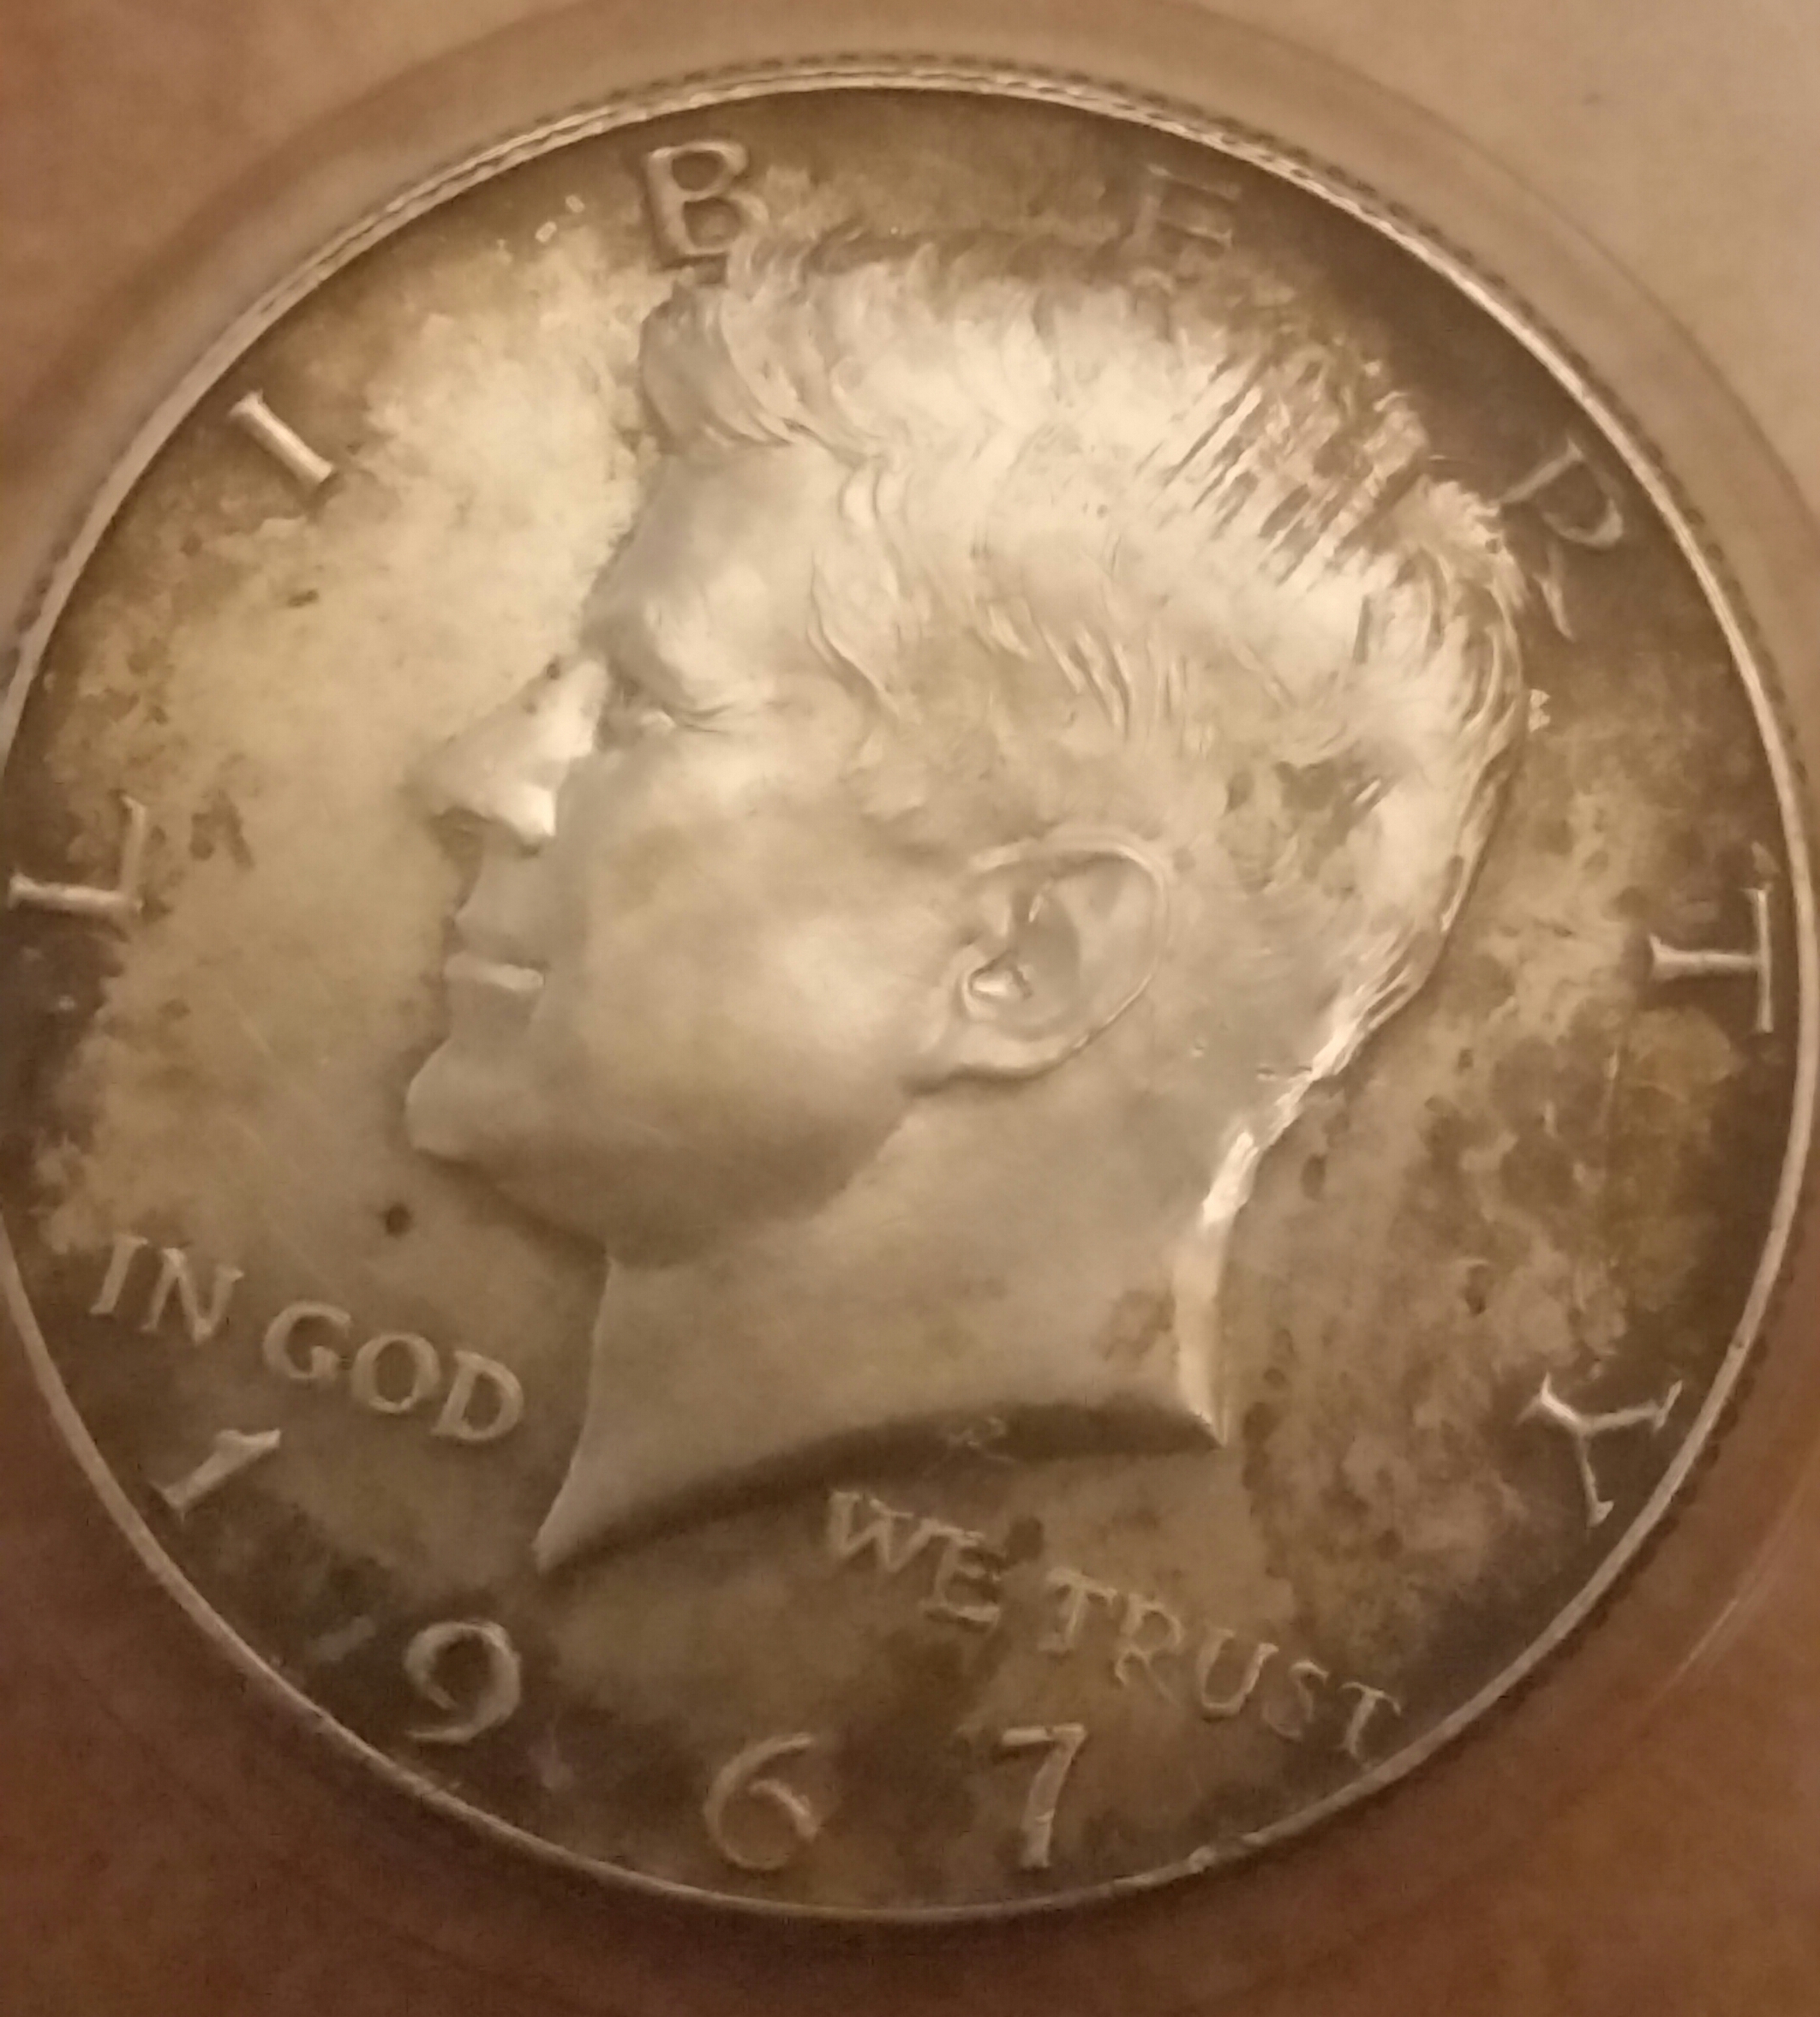 Is there an organization for people who deal in old and rare coins?